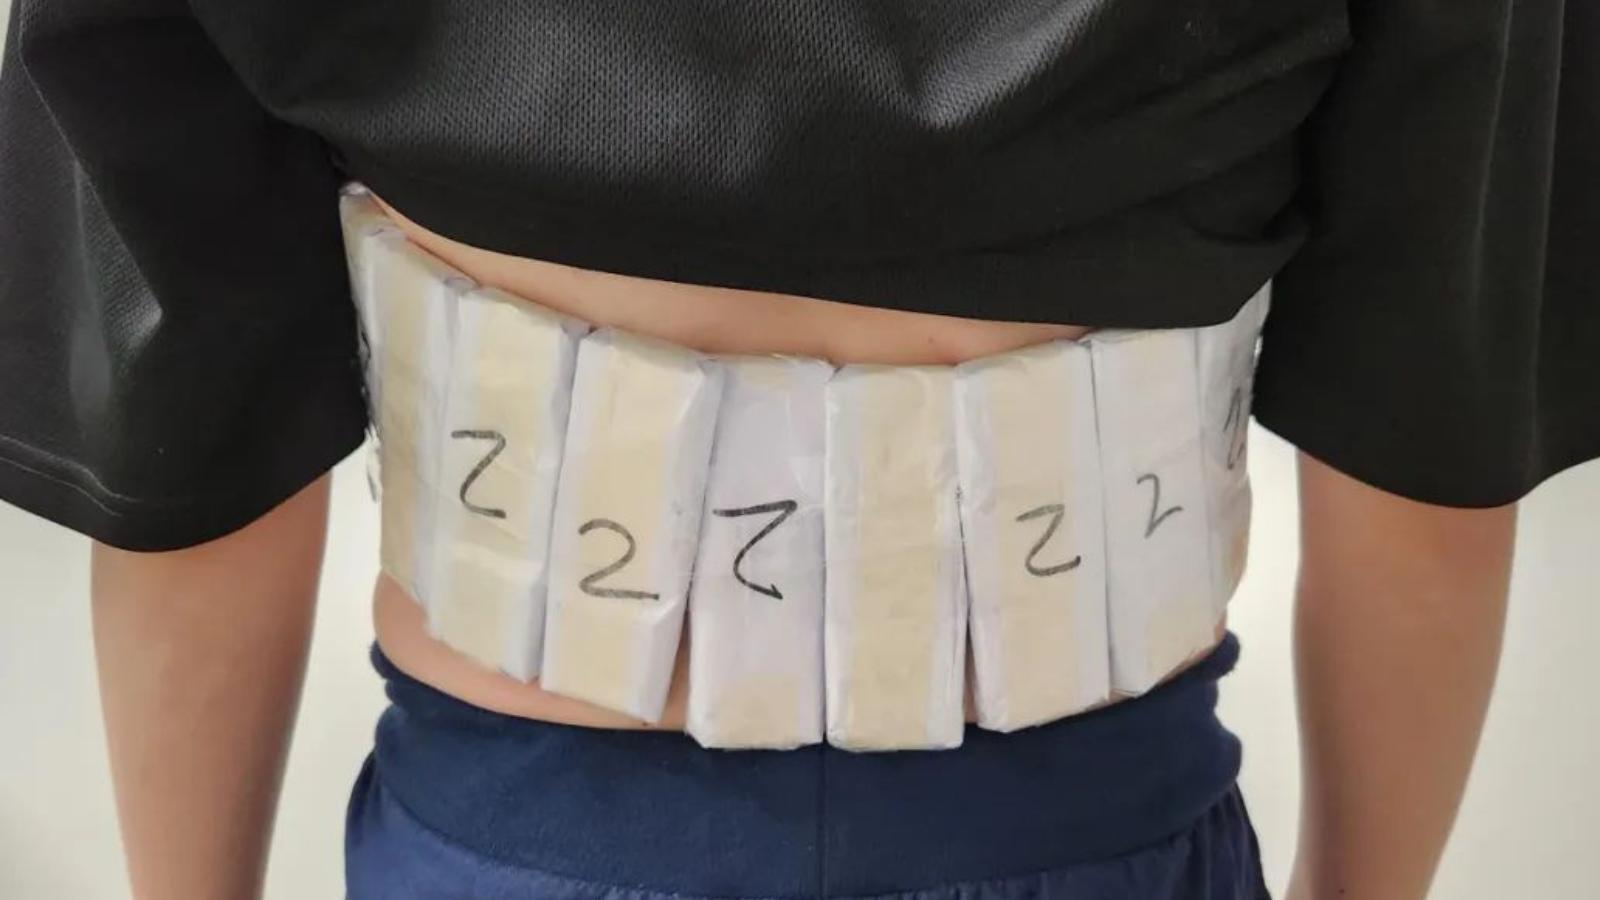 CPUs strapped to a man's stomach